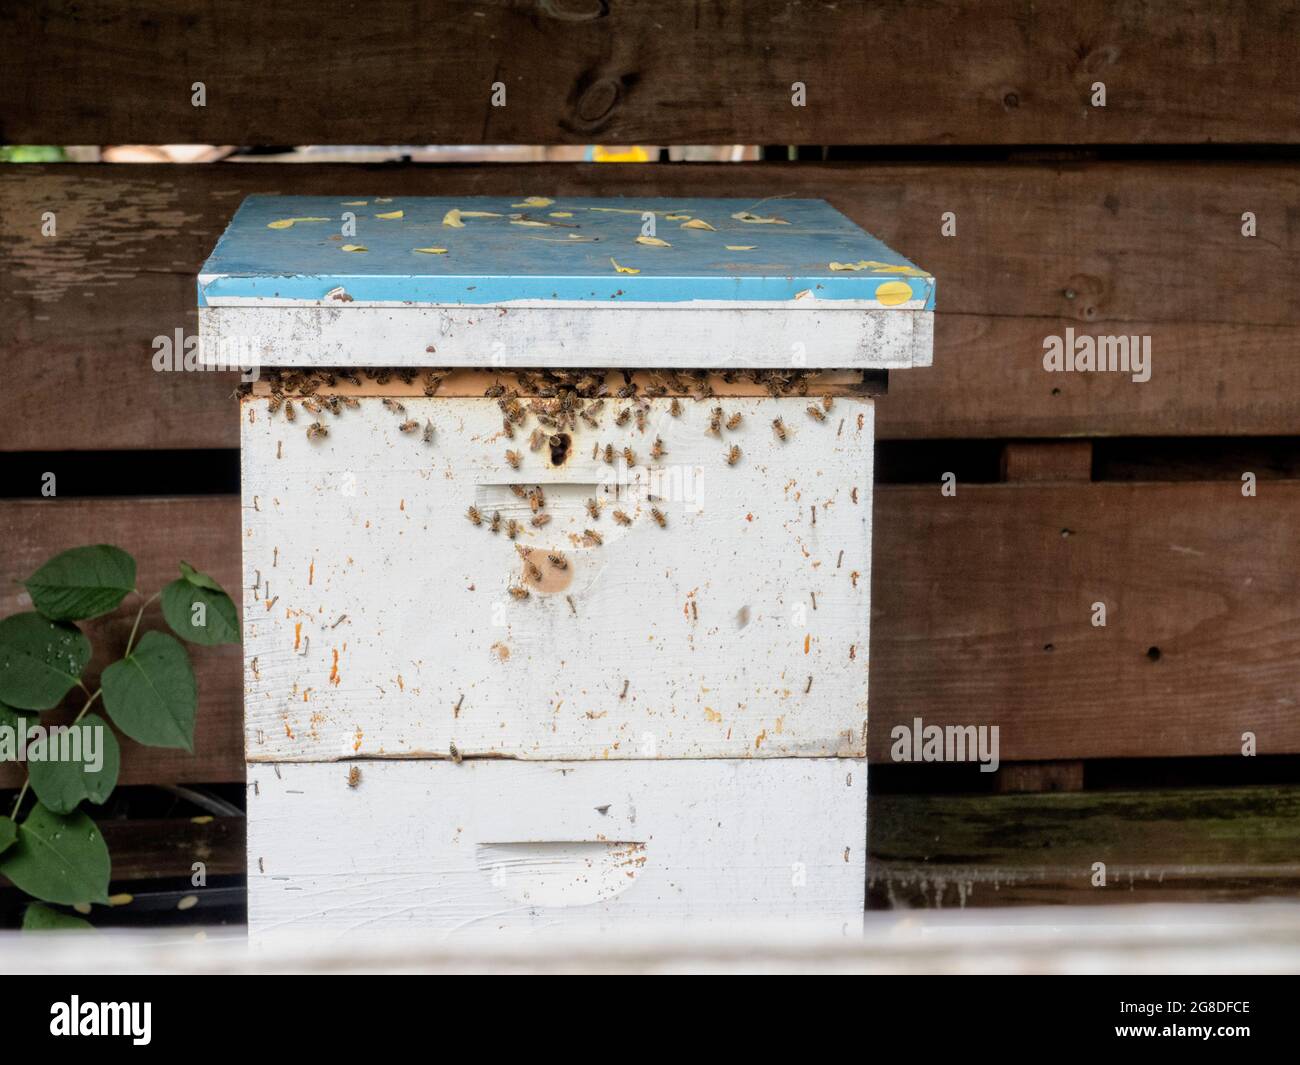 North America - United States, New York City: Honey bee boxes at the Halsey Community Garden located in Brooklyn. Stock Photo